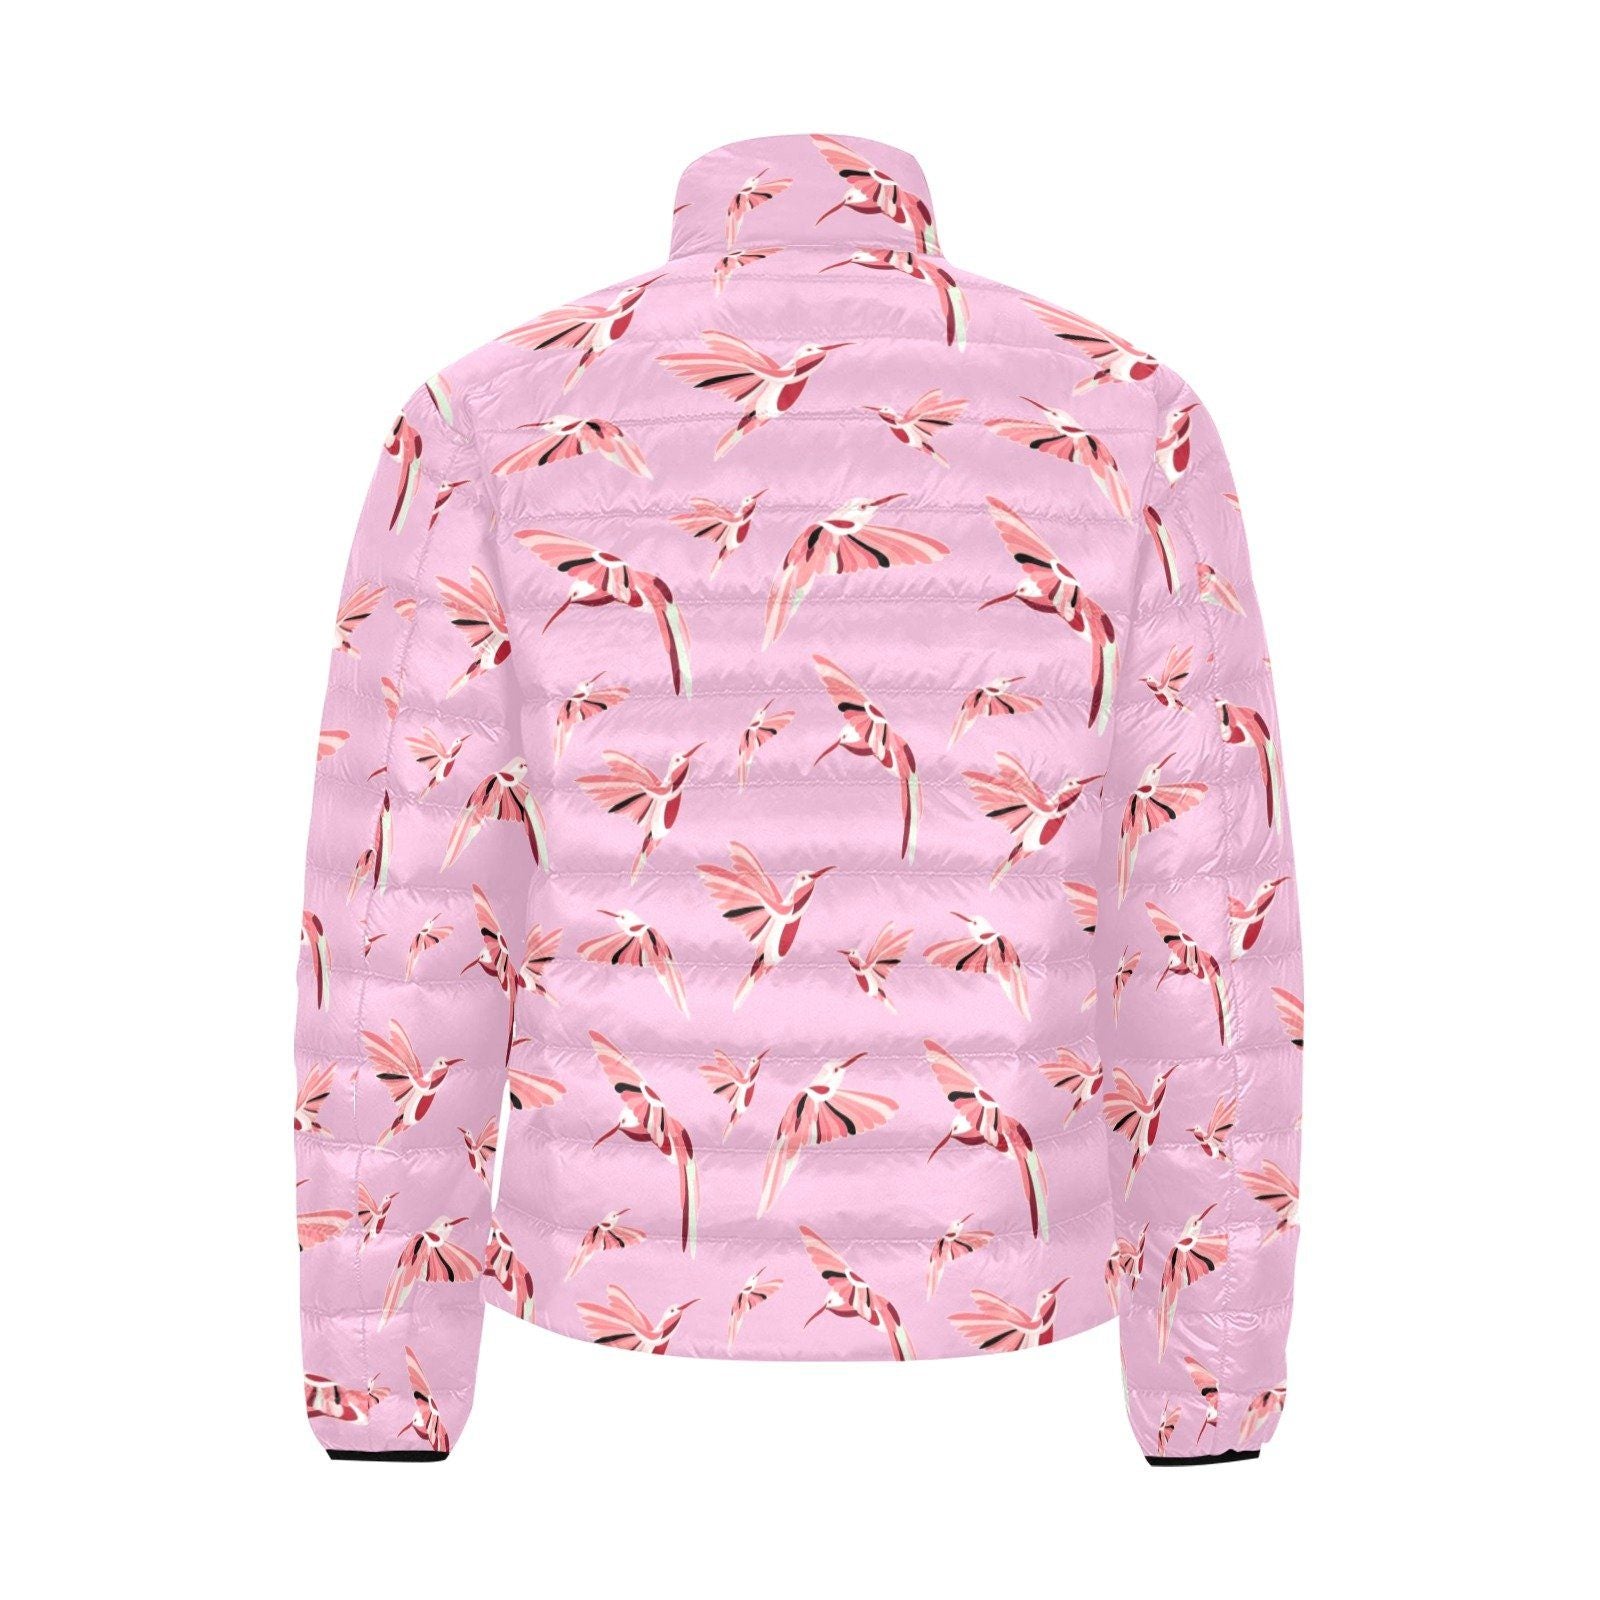 Strawberry Pink Men's Stand Collar Padded Jacket (Model H41) Men's Stand Collar Padded Jacket (H41) e-joyer 